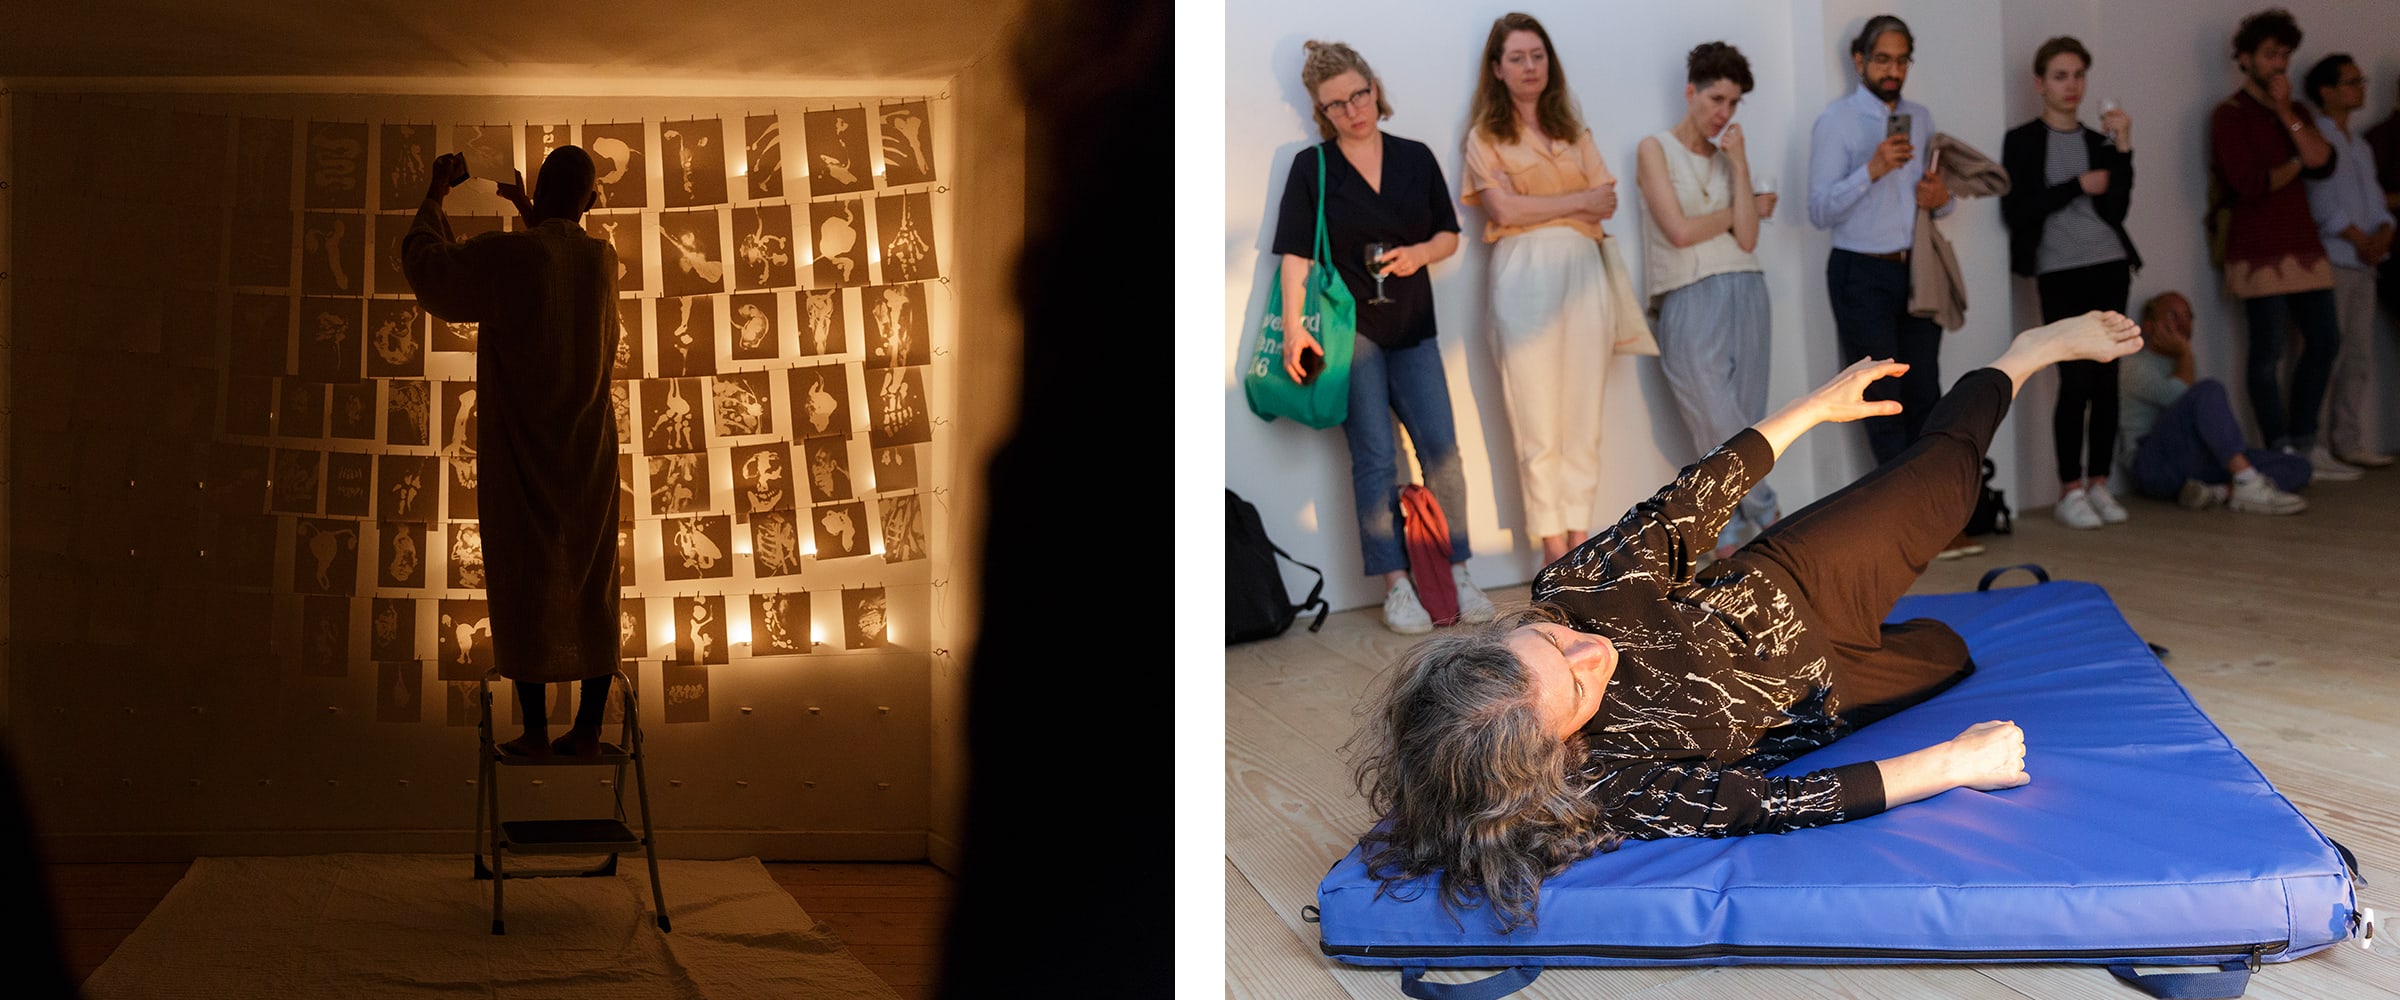 Left: Performance by Antonio Obá at a Delfina Foundation open studios, 2017. Right: Performance by artist in residence Tamara Kuselman as part of Delfina Foundation 'Open Studios', 2018. Photograph by Tim Bowditch. Courtesy of the Delfina Foundation.